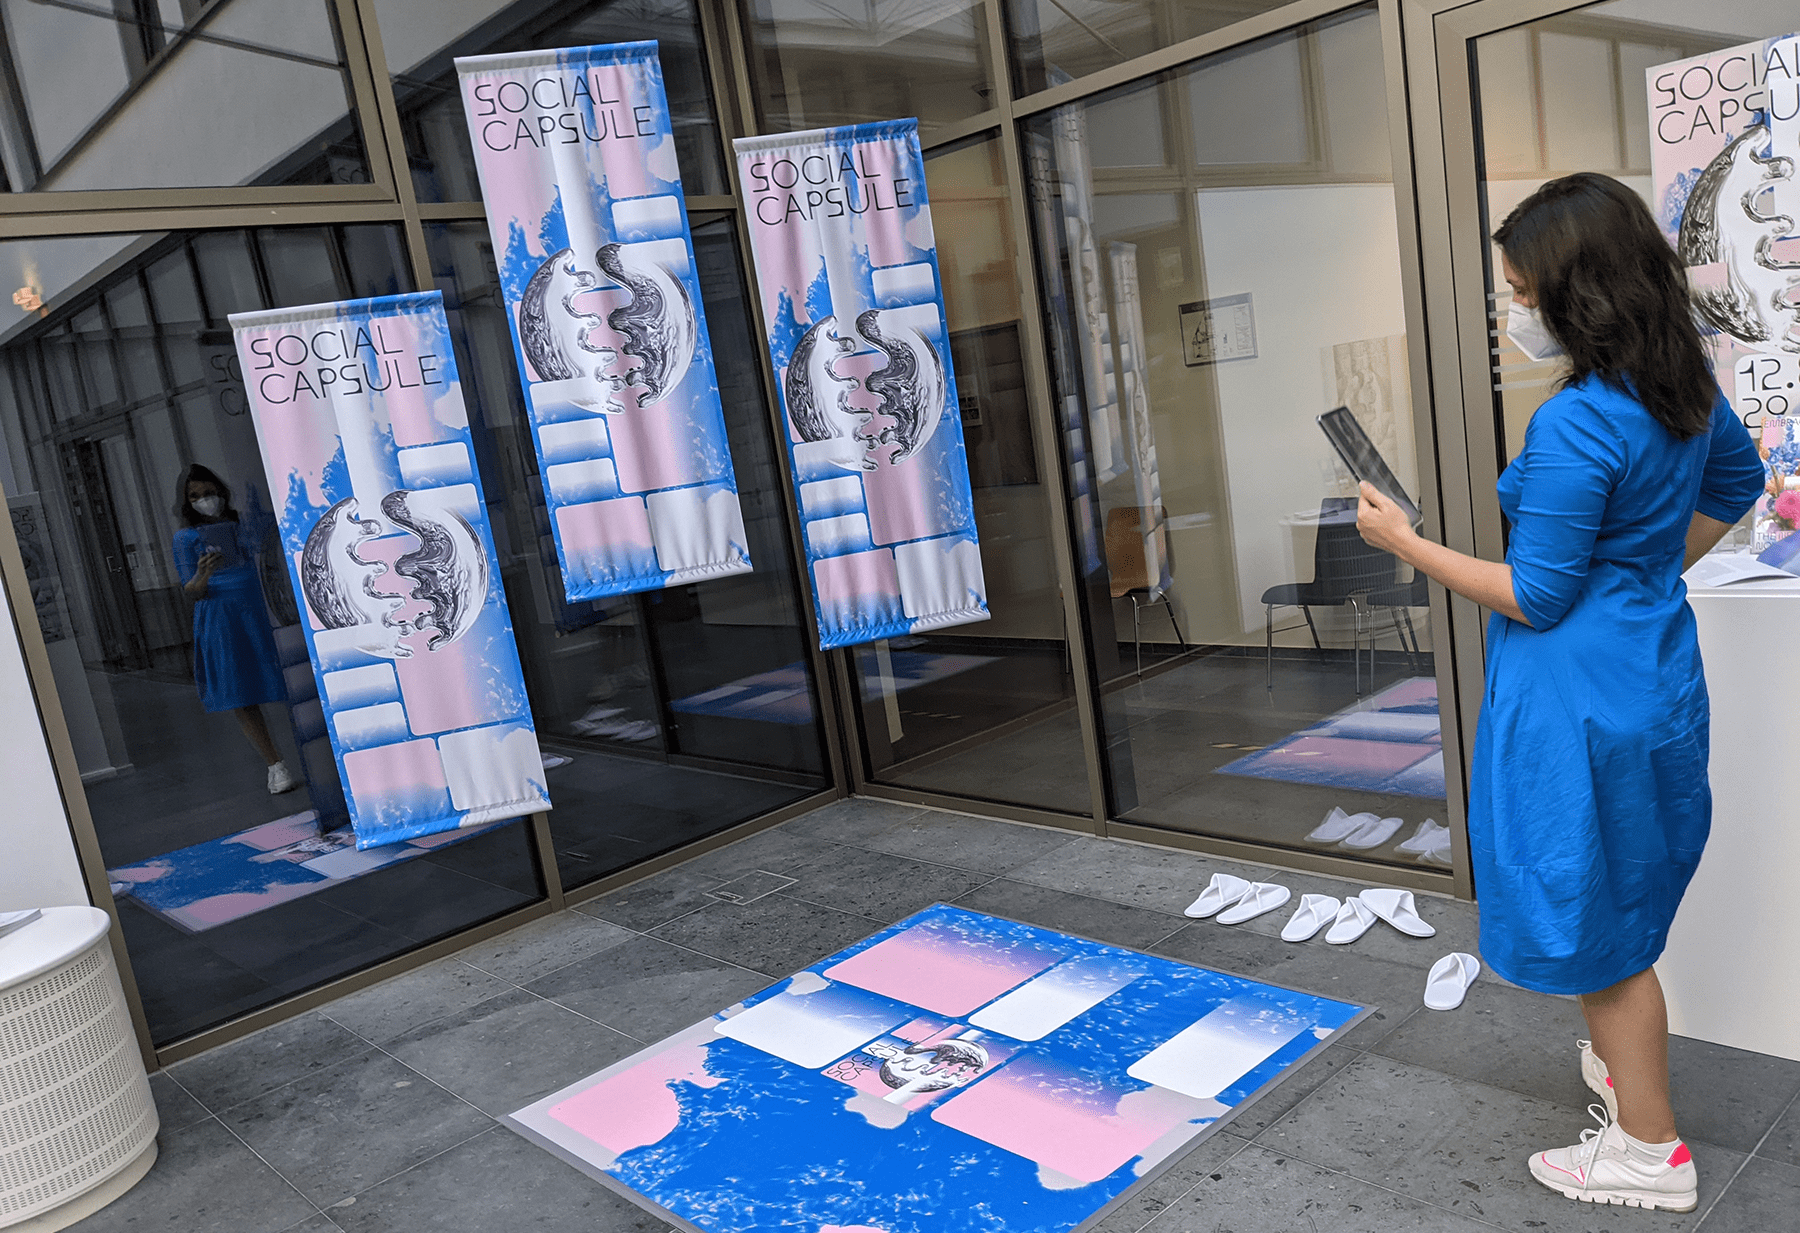 Theresa Reiwer, 2021, augmented room installation. Supporting developers: Carlos A. Serrano and Janosch Marian Friedrich.